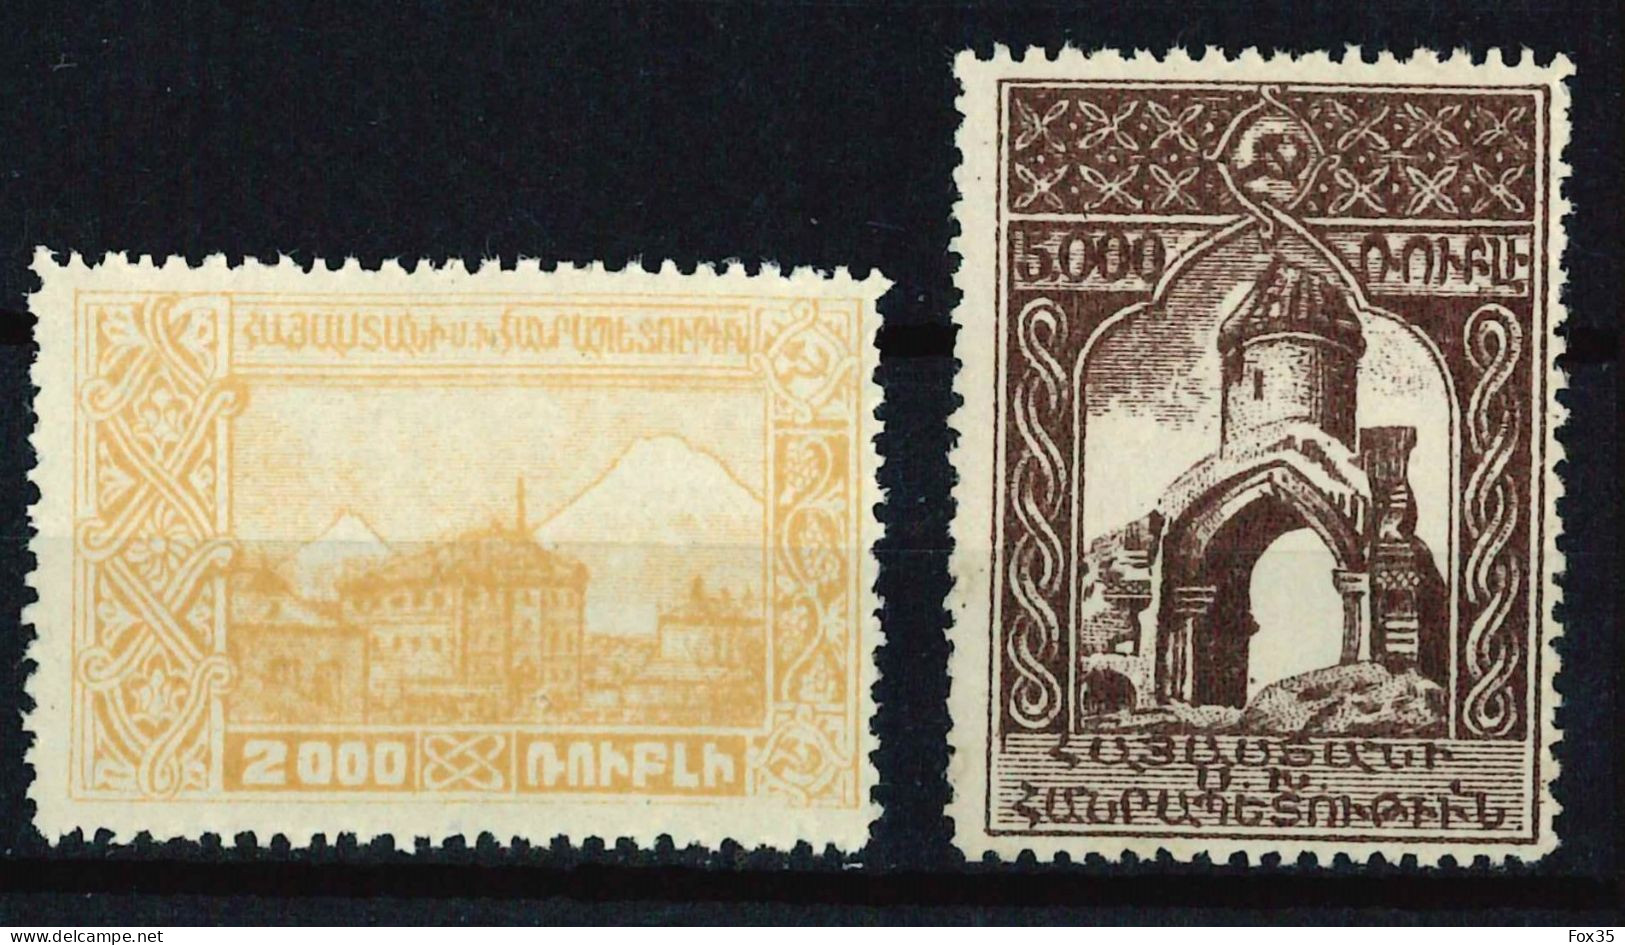 Armenia 1919-1923, 1921 First Constantinople Pictorials Issue, 'complete' set, perforated, sold as genuine, CV 48€